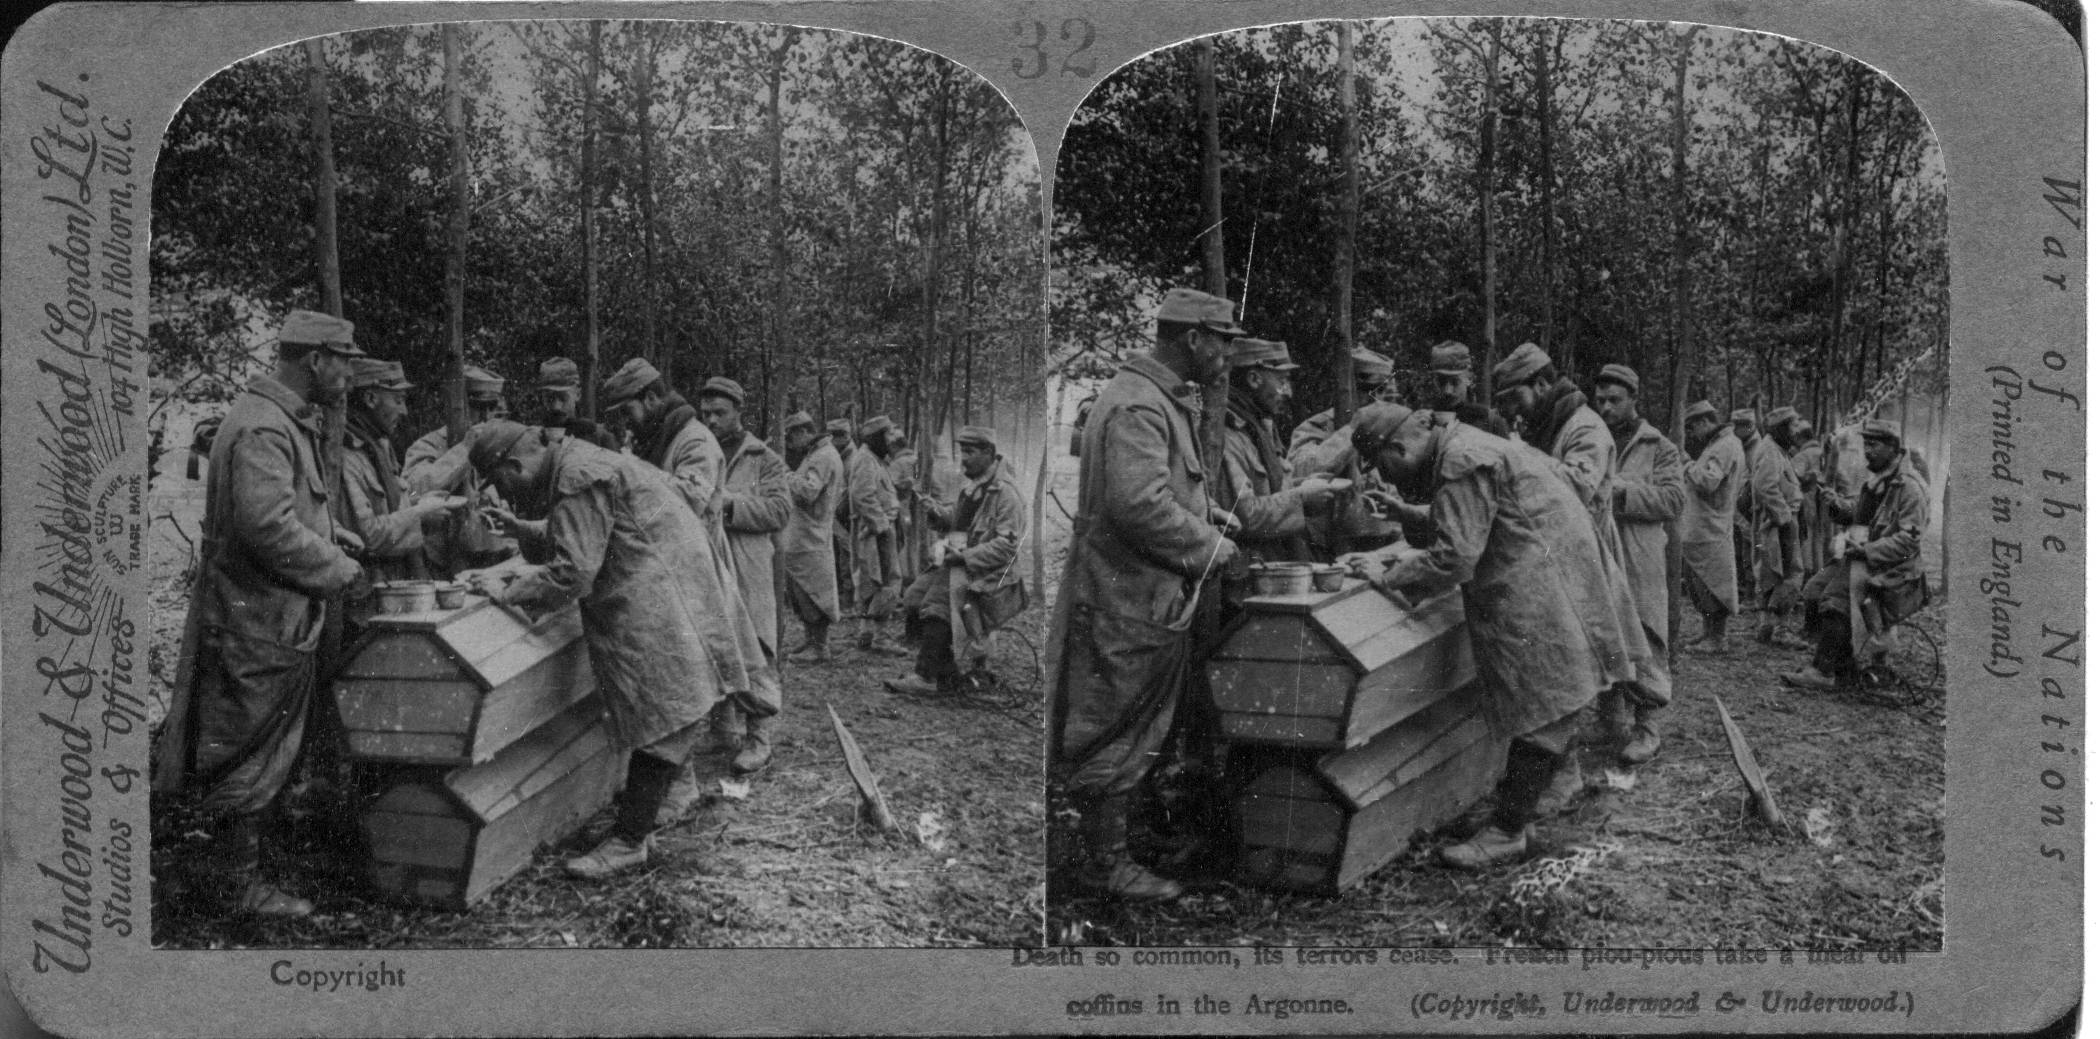 Death so common, its terrors cease. French poilus take a meal on coffins in the Argonne